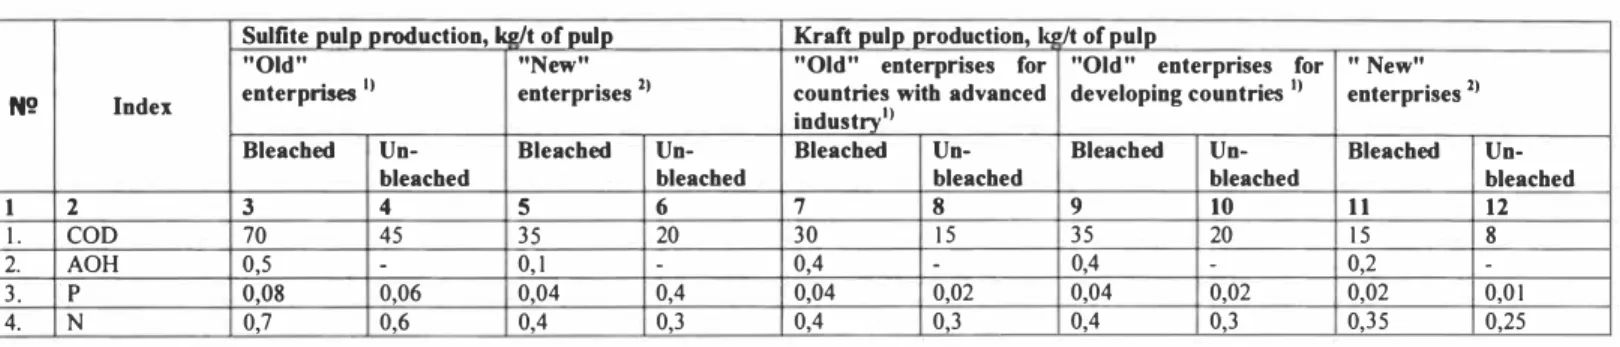 Table I  Norms of pollutants discharge with the effluents of sulfite and kraft pulp production 